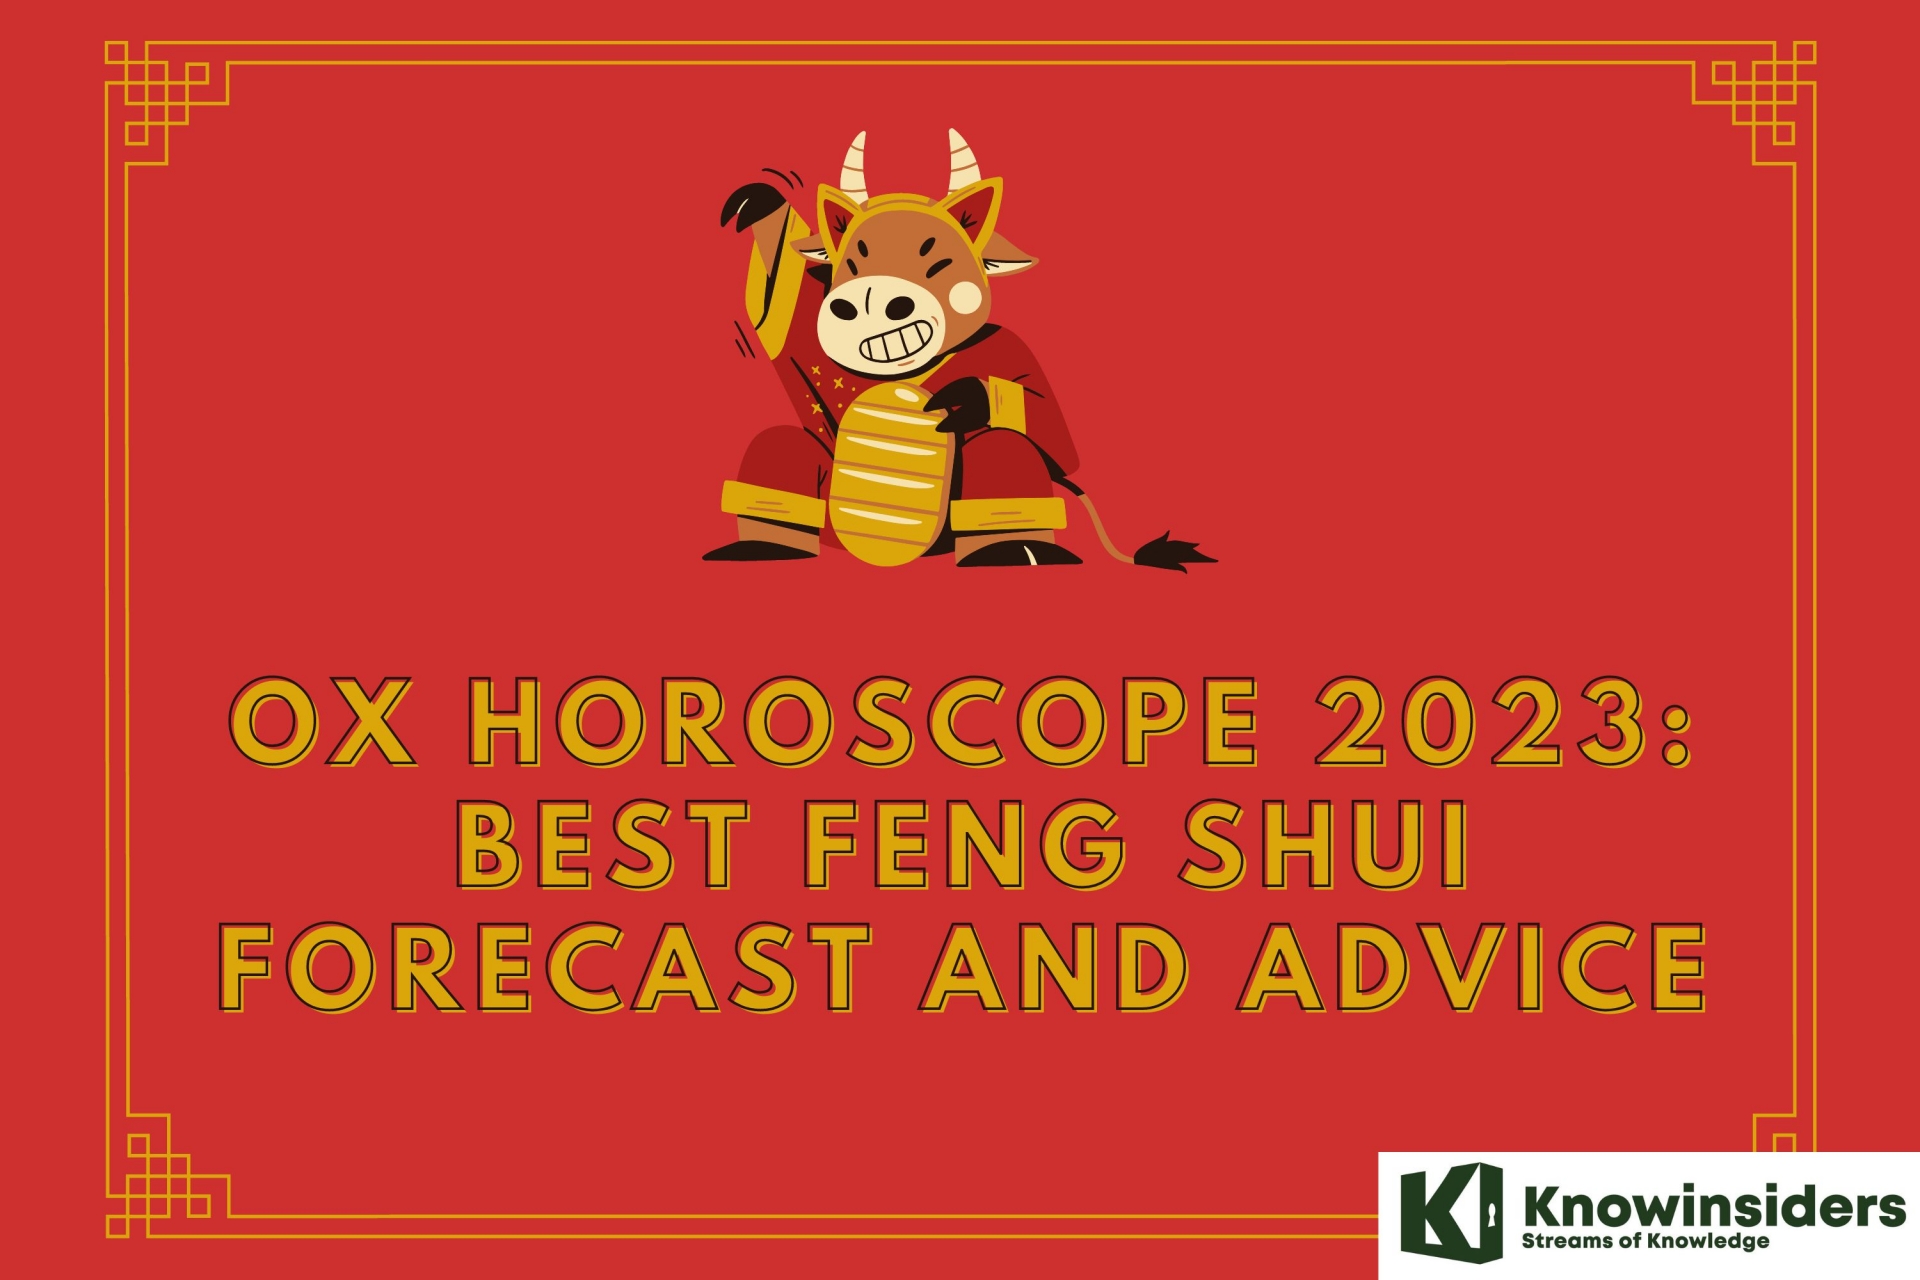 Ox Horoscope 2023: Best Feng Shui Forecast and Advice